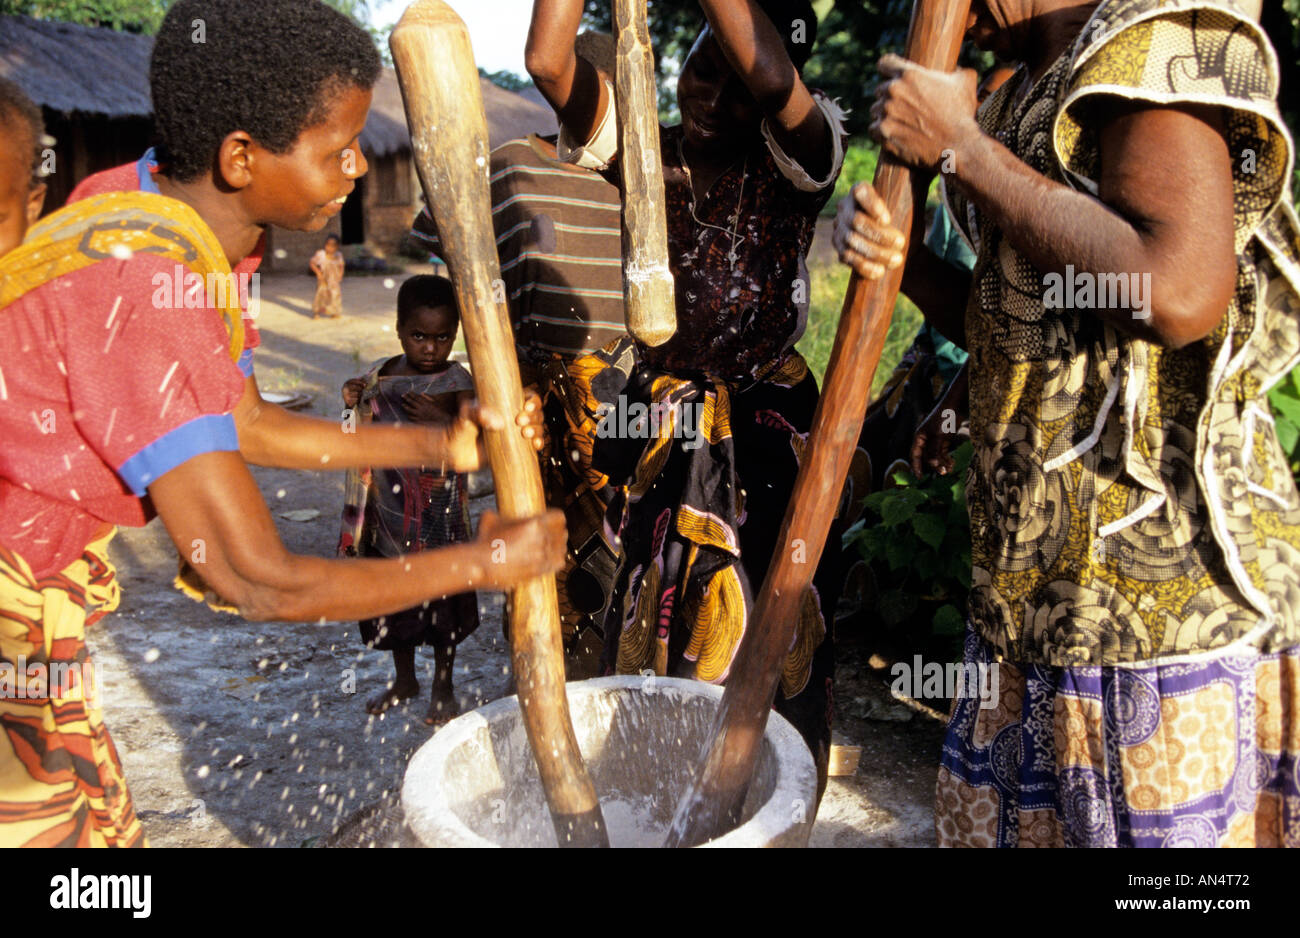 Villagers pounding rice in big mortar, Africa Stock Photo